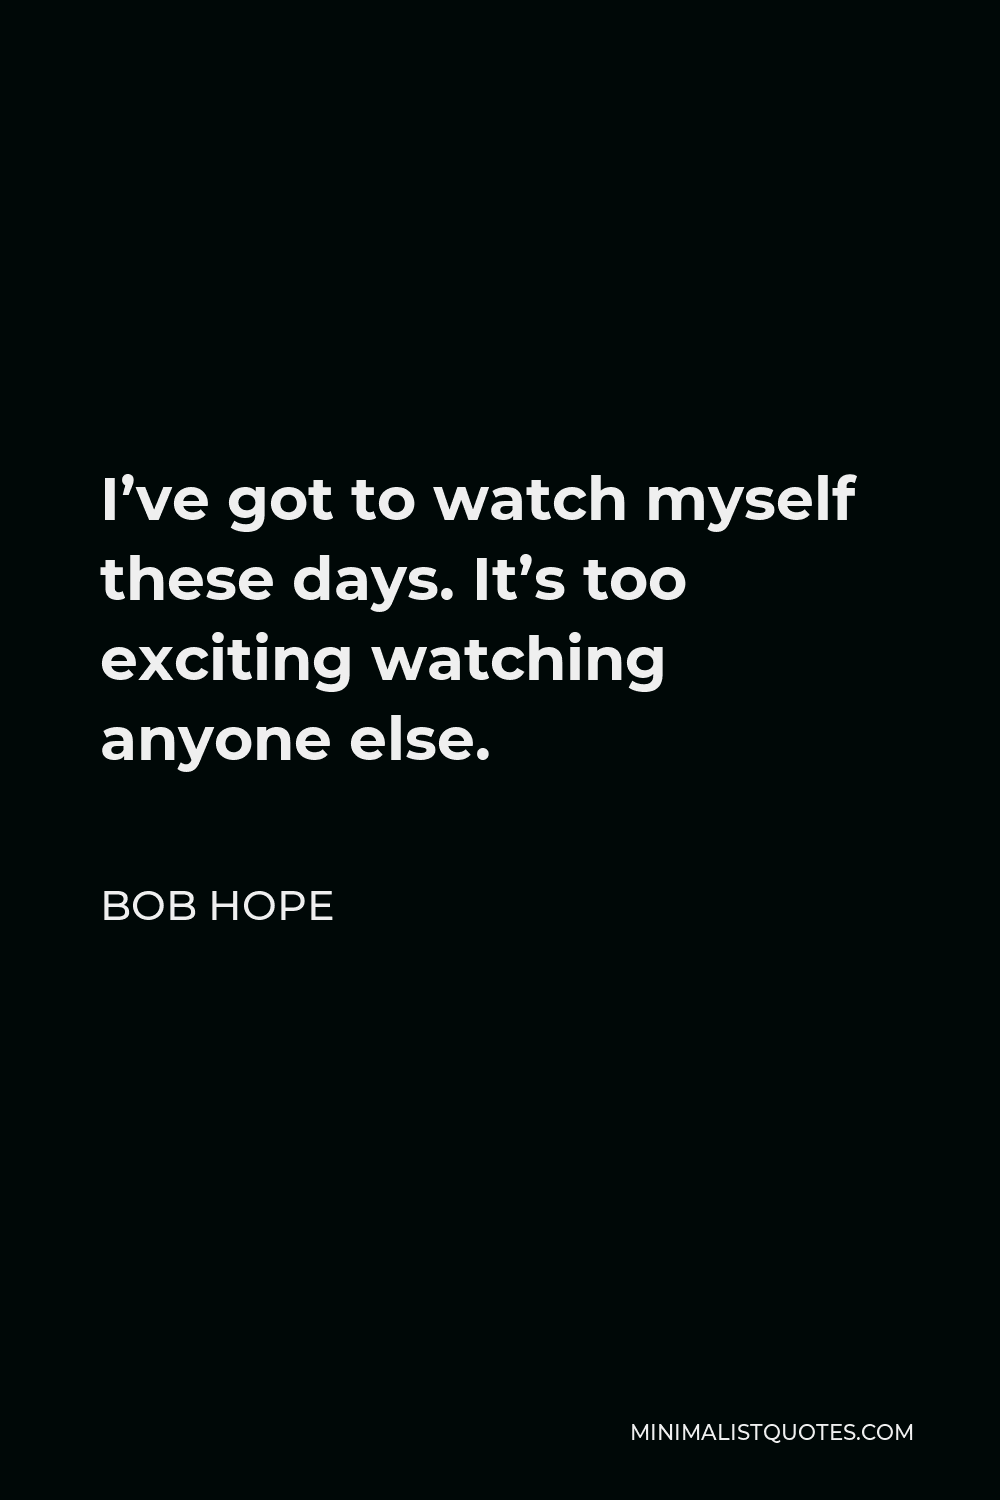 Bob Hope Quote - I’ve got to watch myself these days. It’s too exciting watching anyone else.